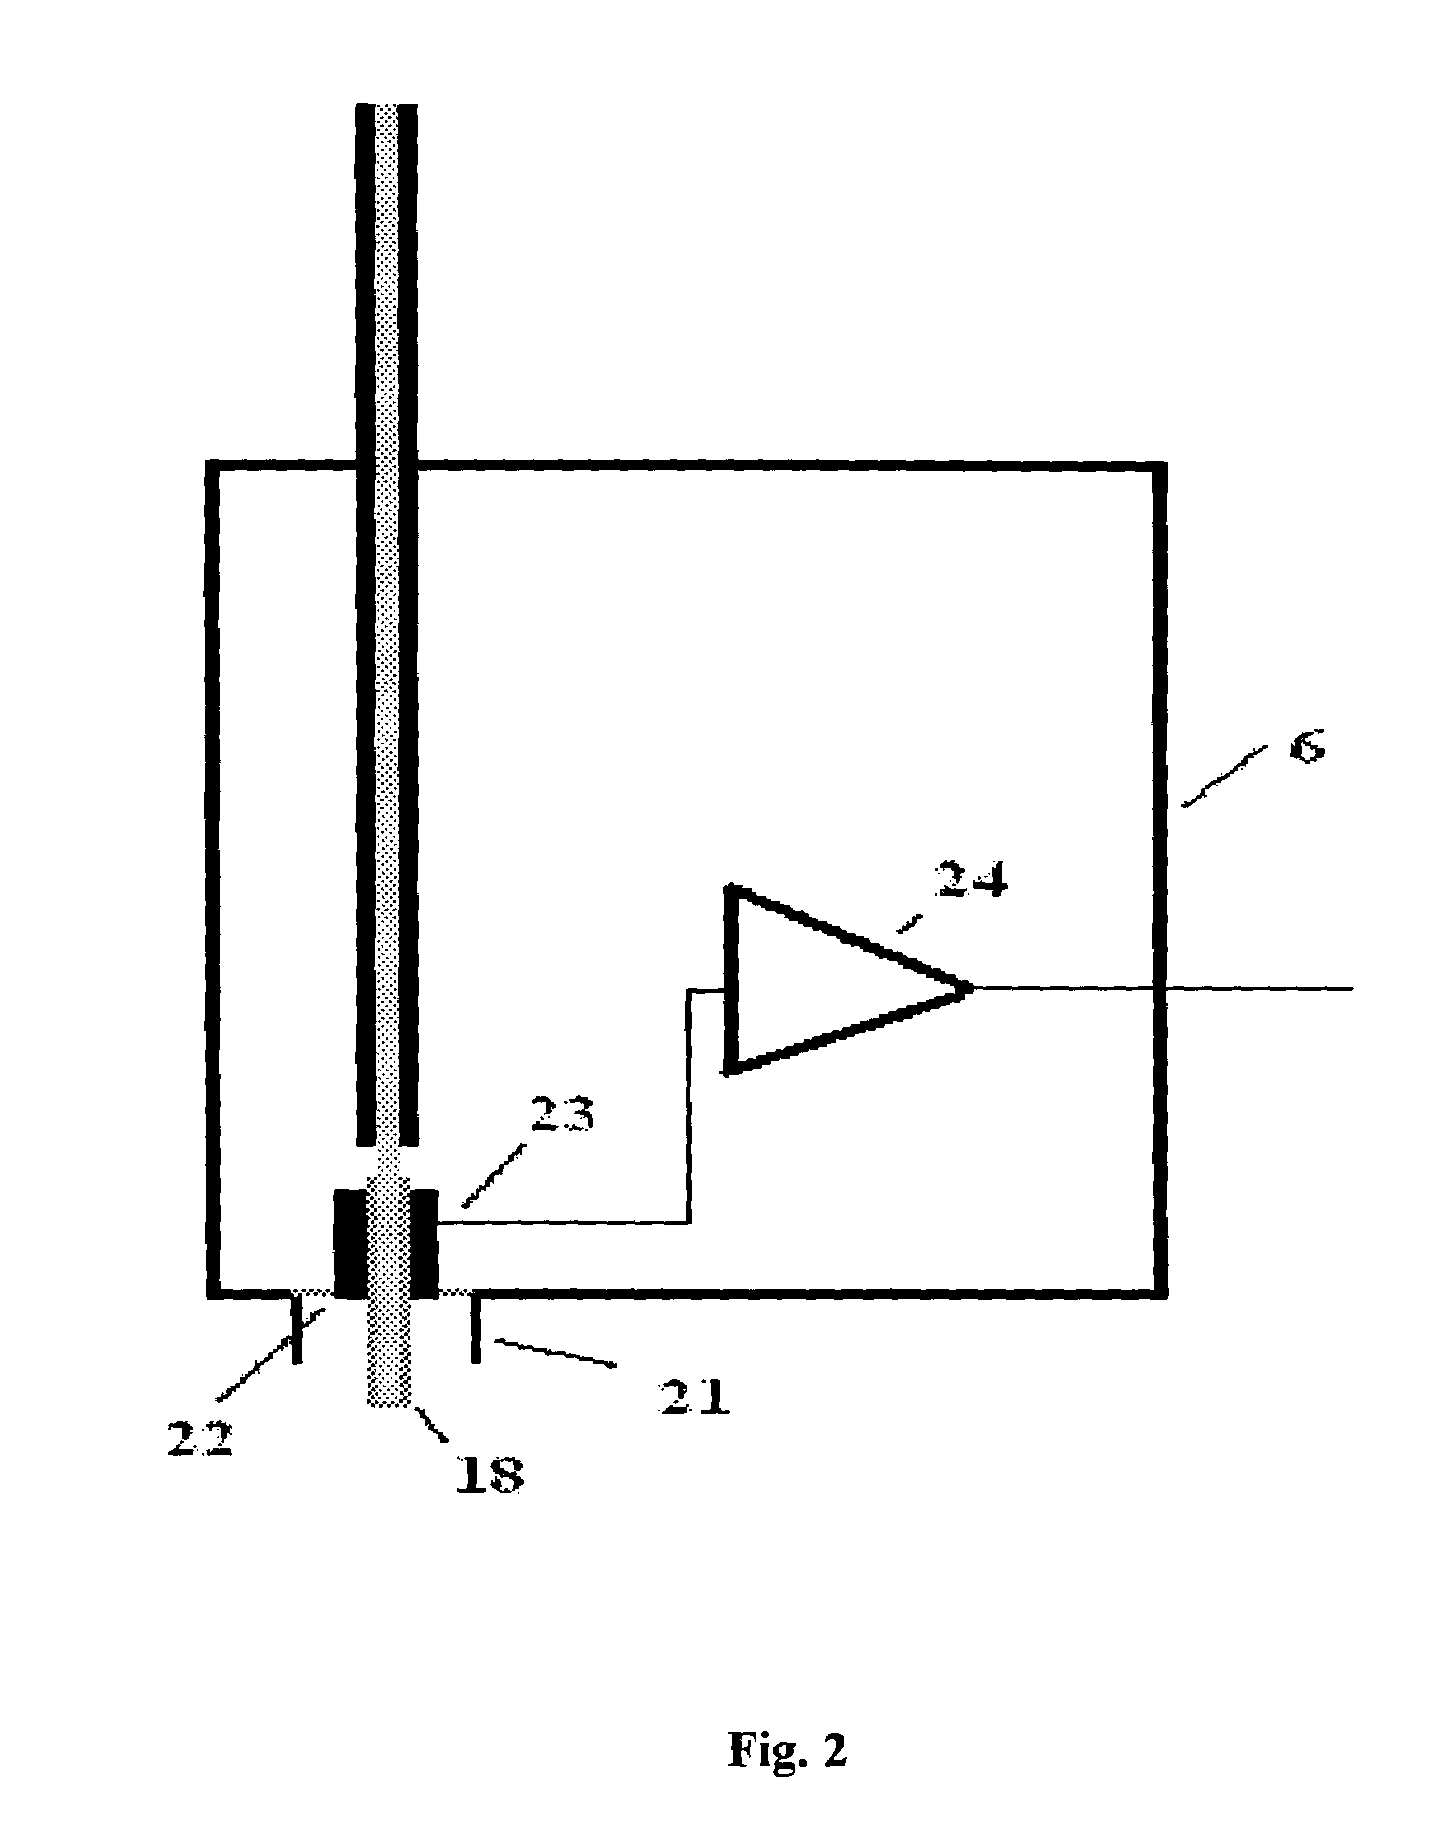 Non-contact method and apparatus for measurement of leakage current of p-n junctions in IC product wafers